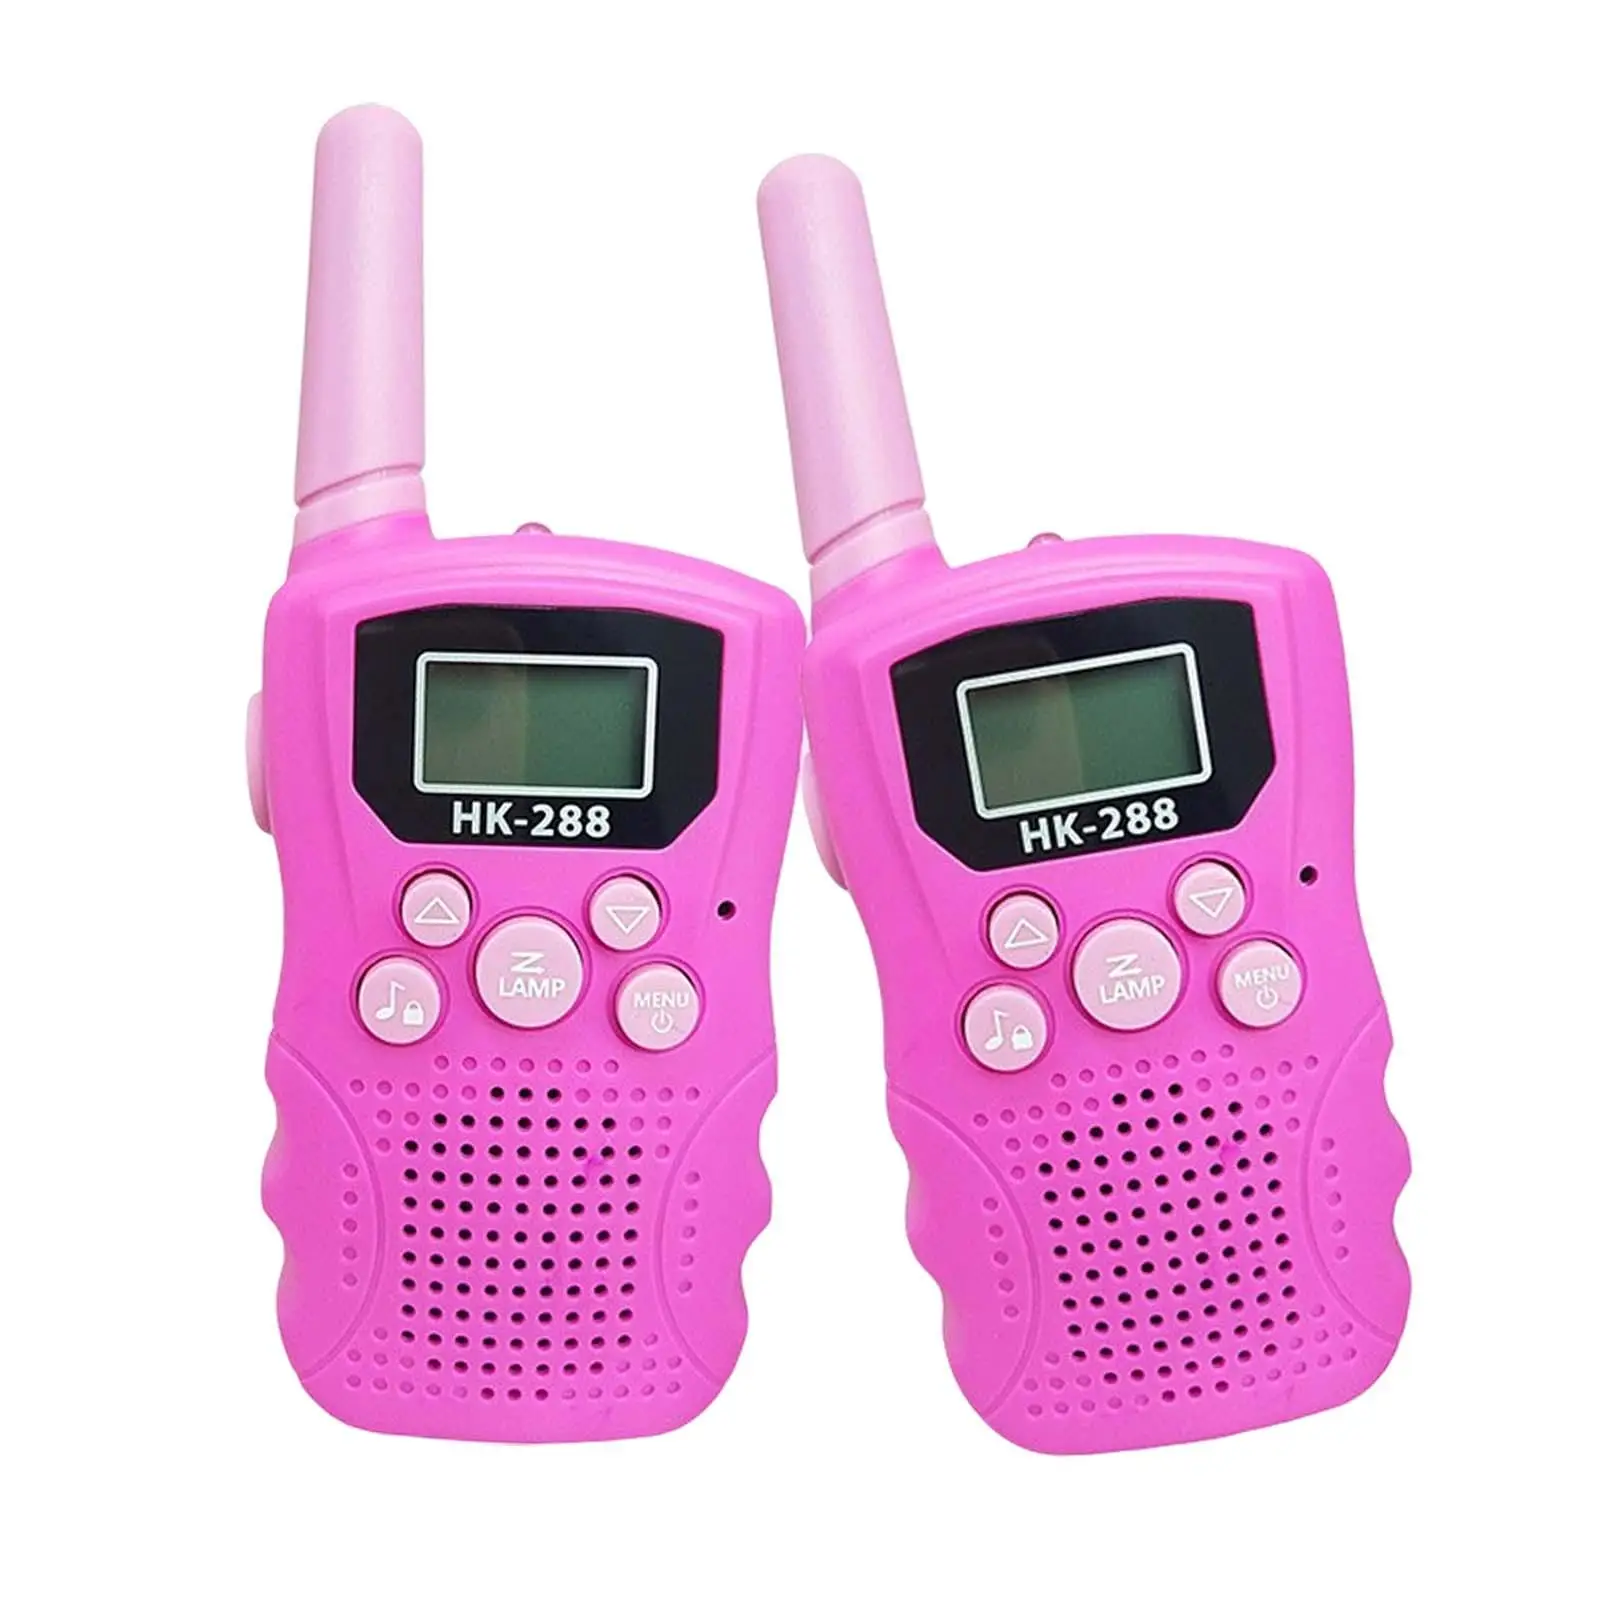 1Pair Kids Walkie Talkies Family Walky Talky for 3-12 Years Old Outdoor Kids